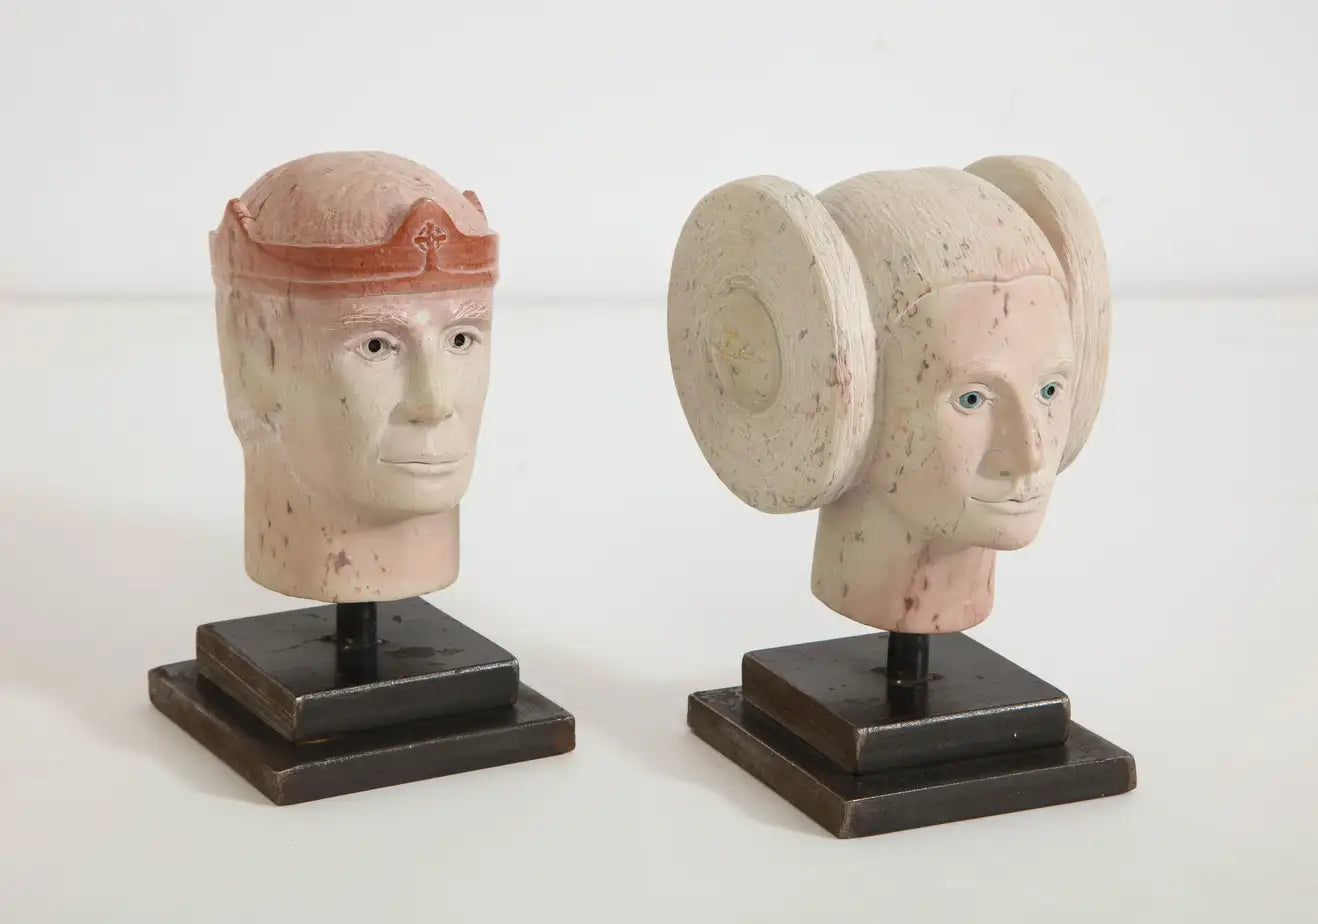 Mystical Prince and Princess Granite Marble Head Sculptures by Scott McLeod